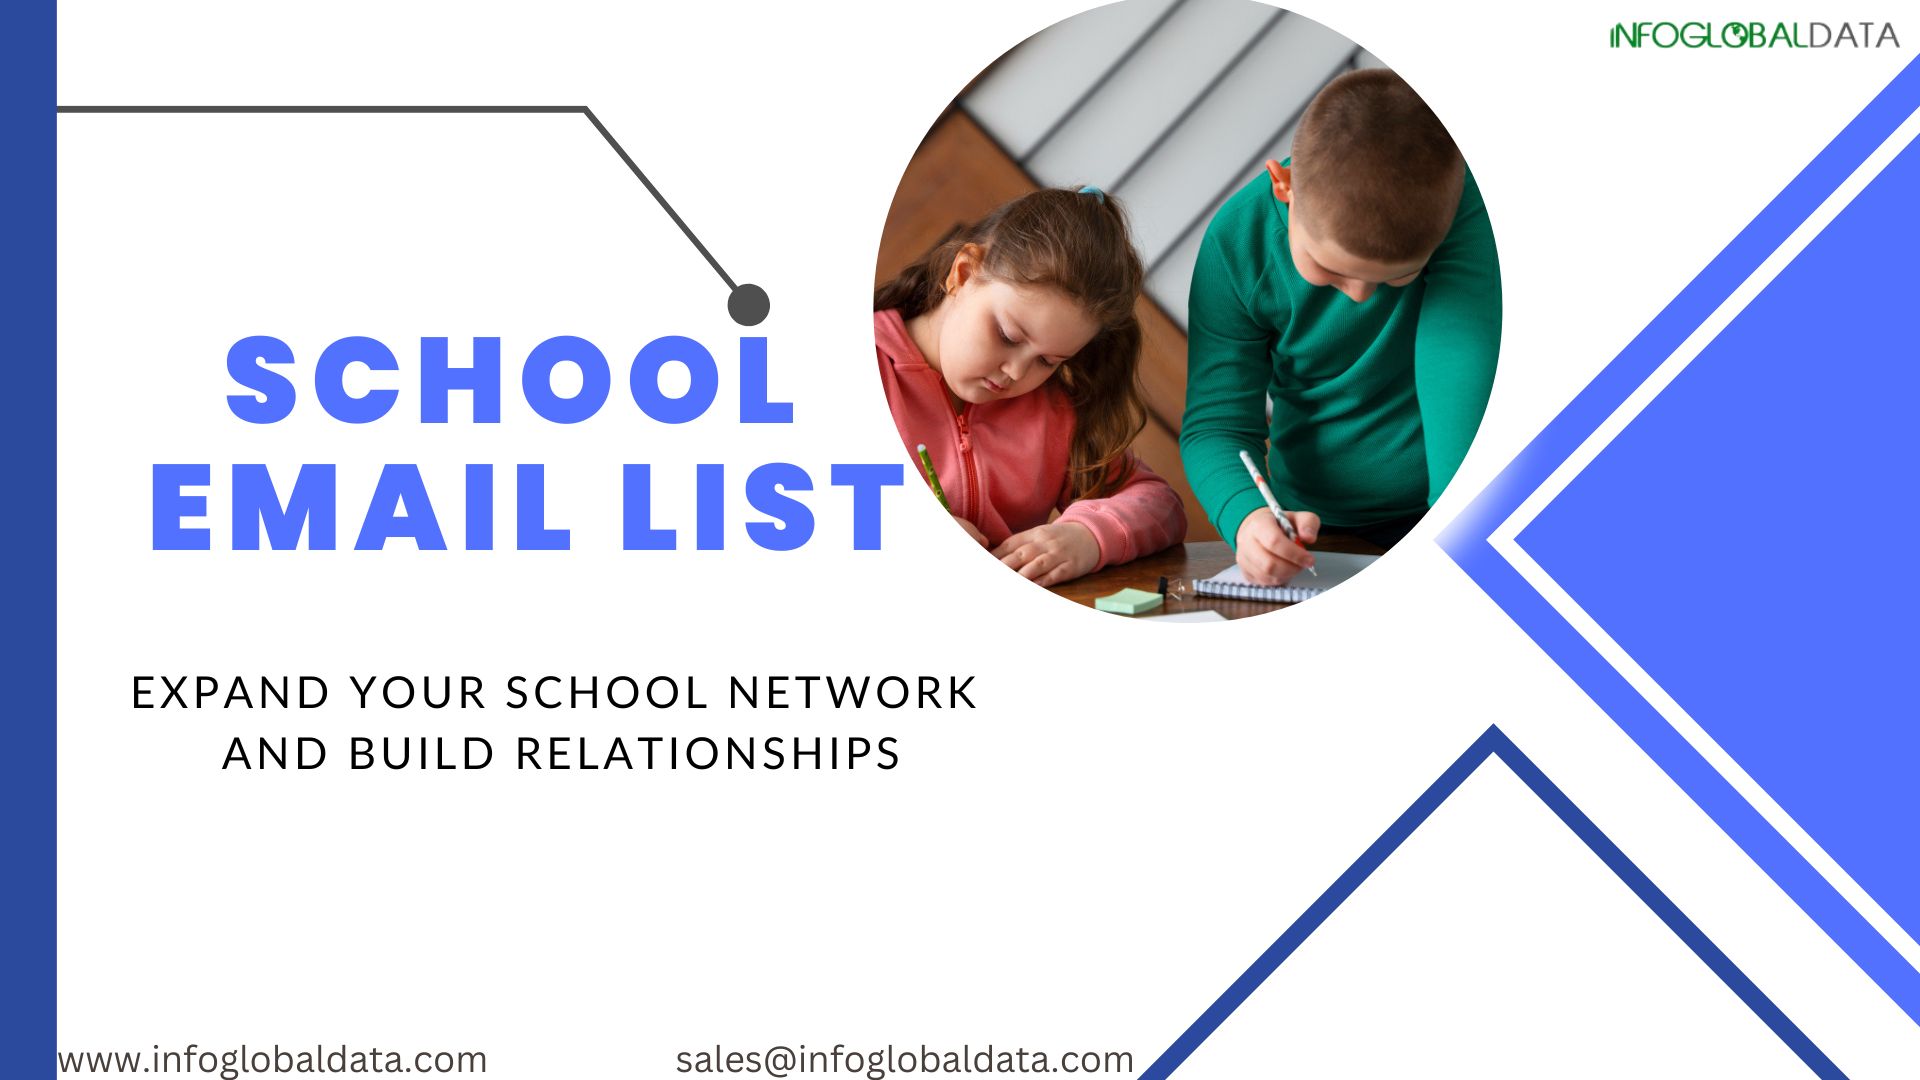  Connect with Educators Worldwide with Our School Email Lists